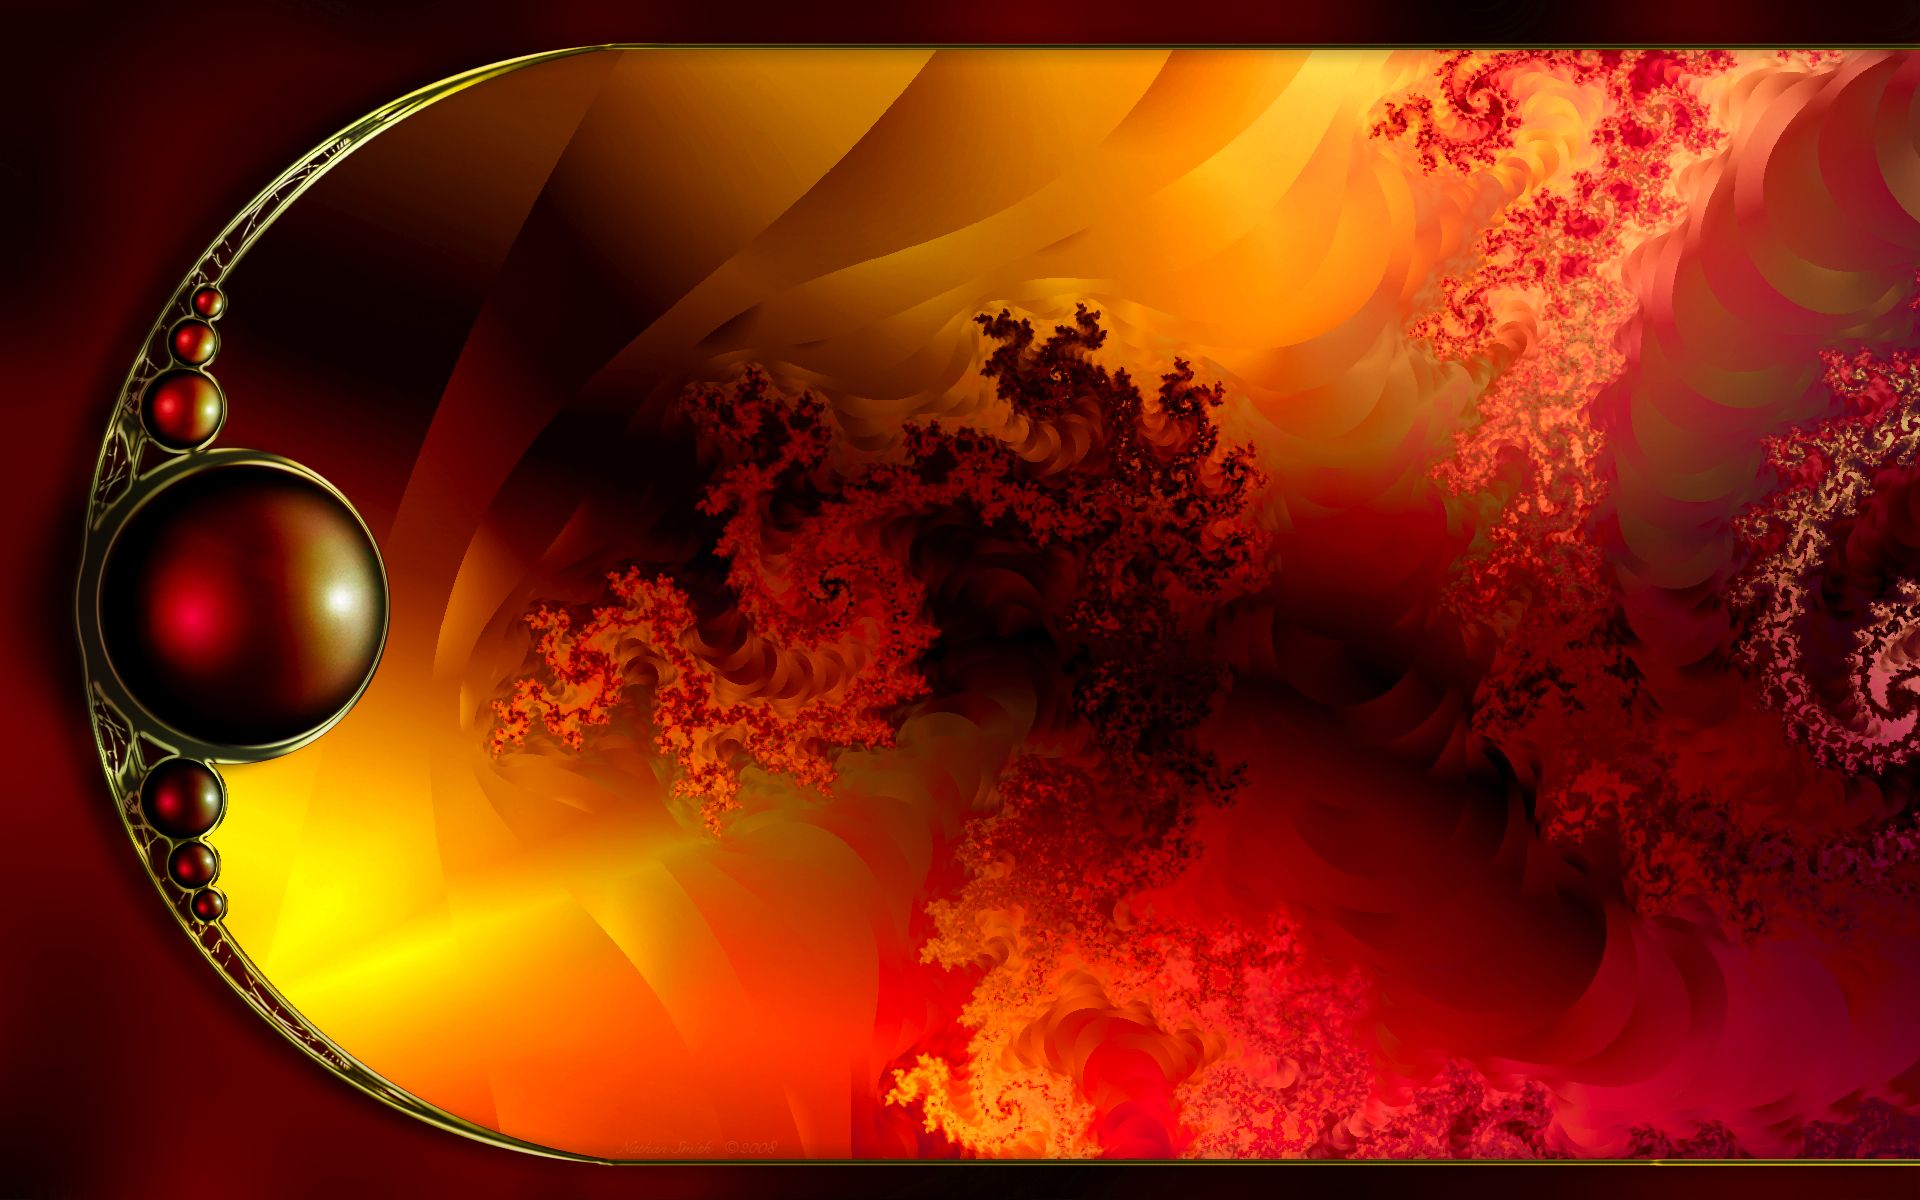 mystic ii abstract red fire flame #4Pu